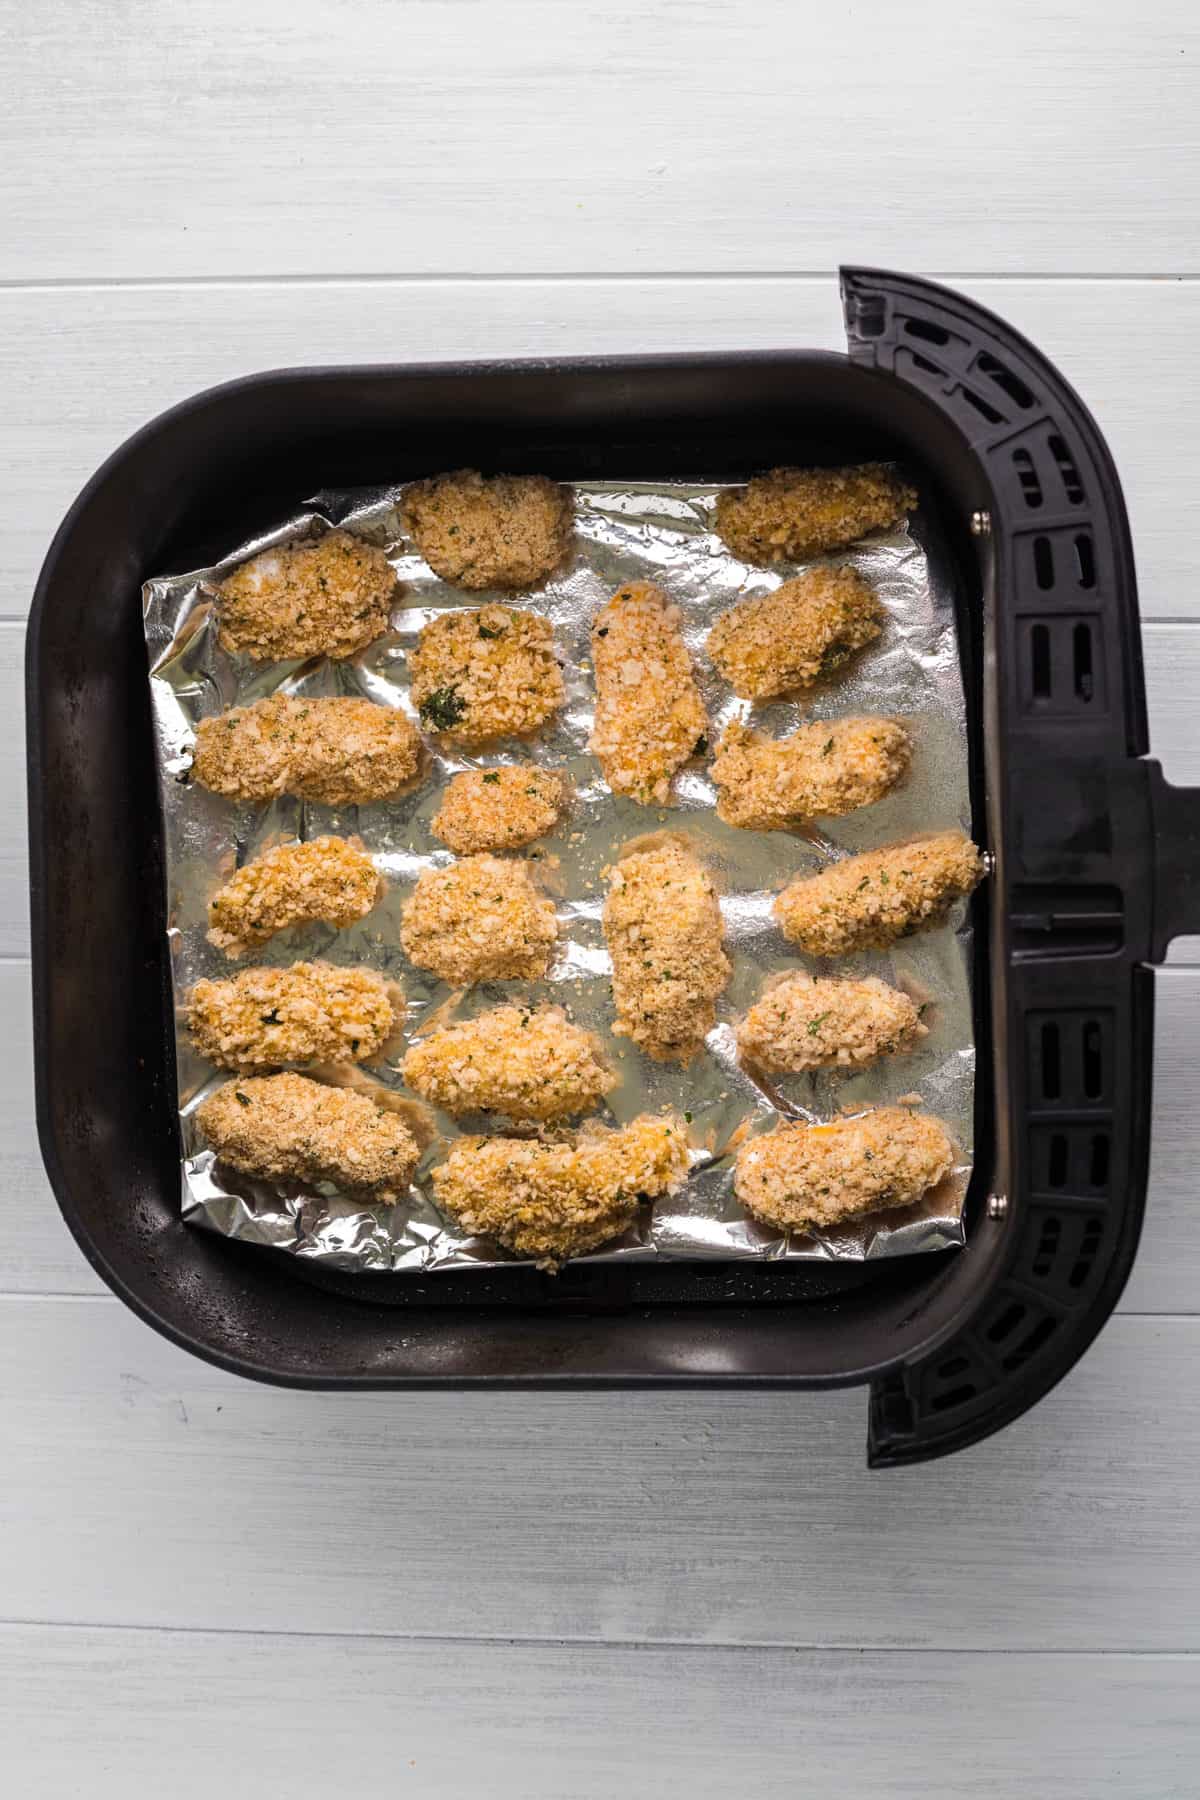 Top view of air fryer basket lined with foil with breaded cheese curds on top of the foil with space around each one. 